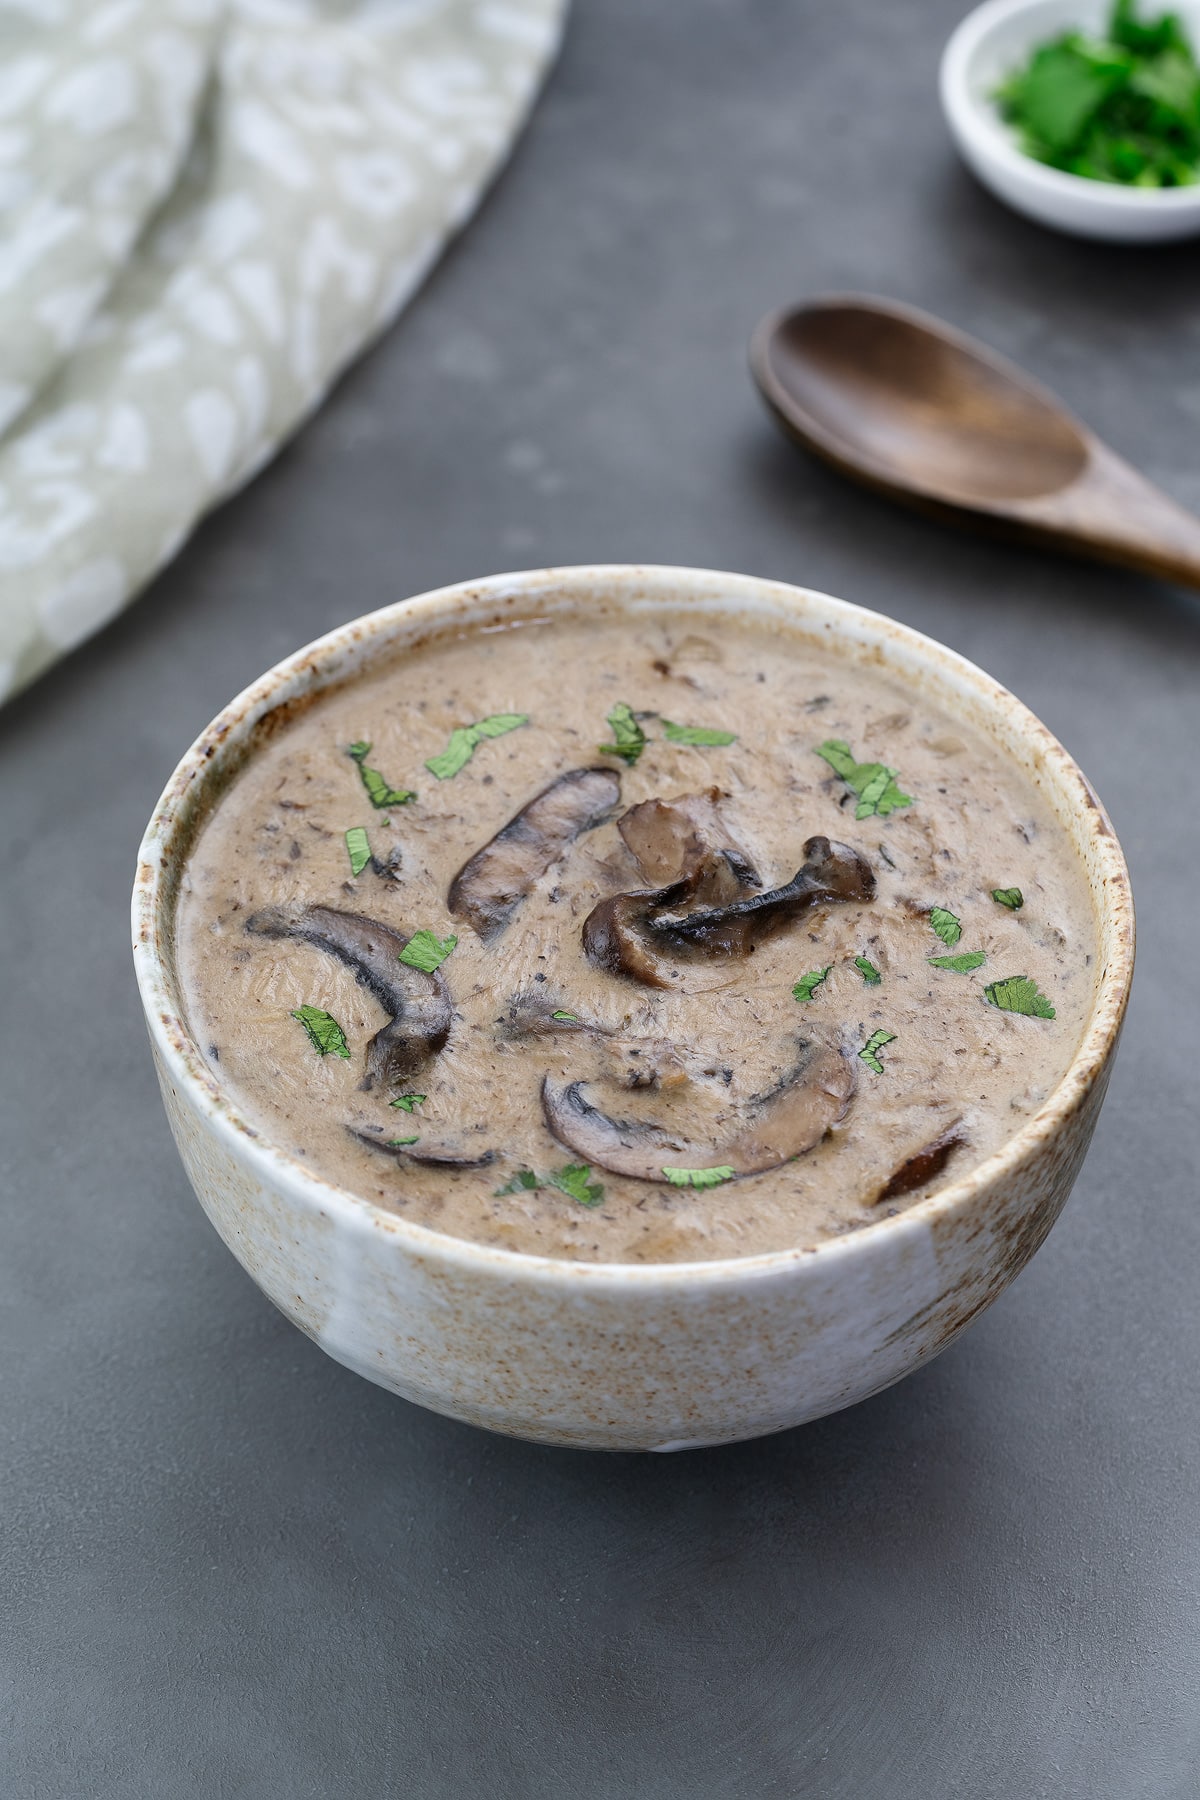 Cream of mushroom soup in a cup on a gray table, with a wooden spoon, towel, and cilantro in a small cup nearby.